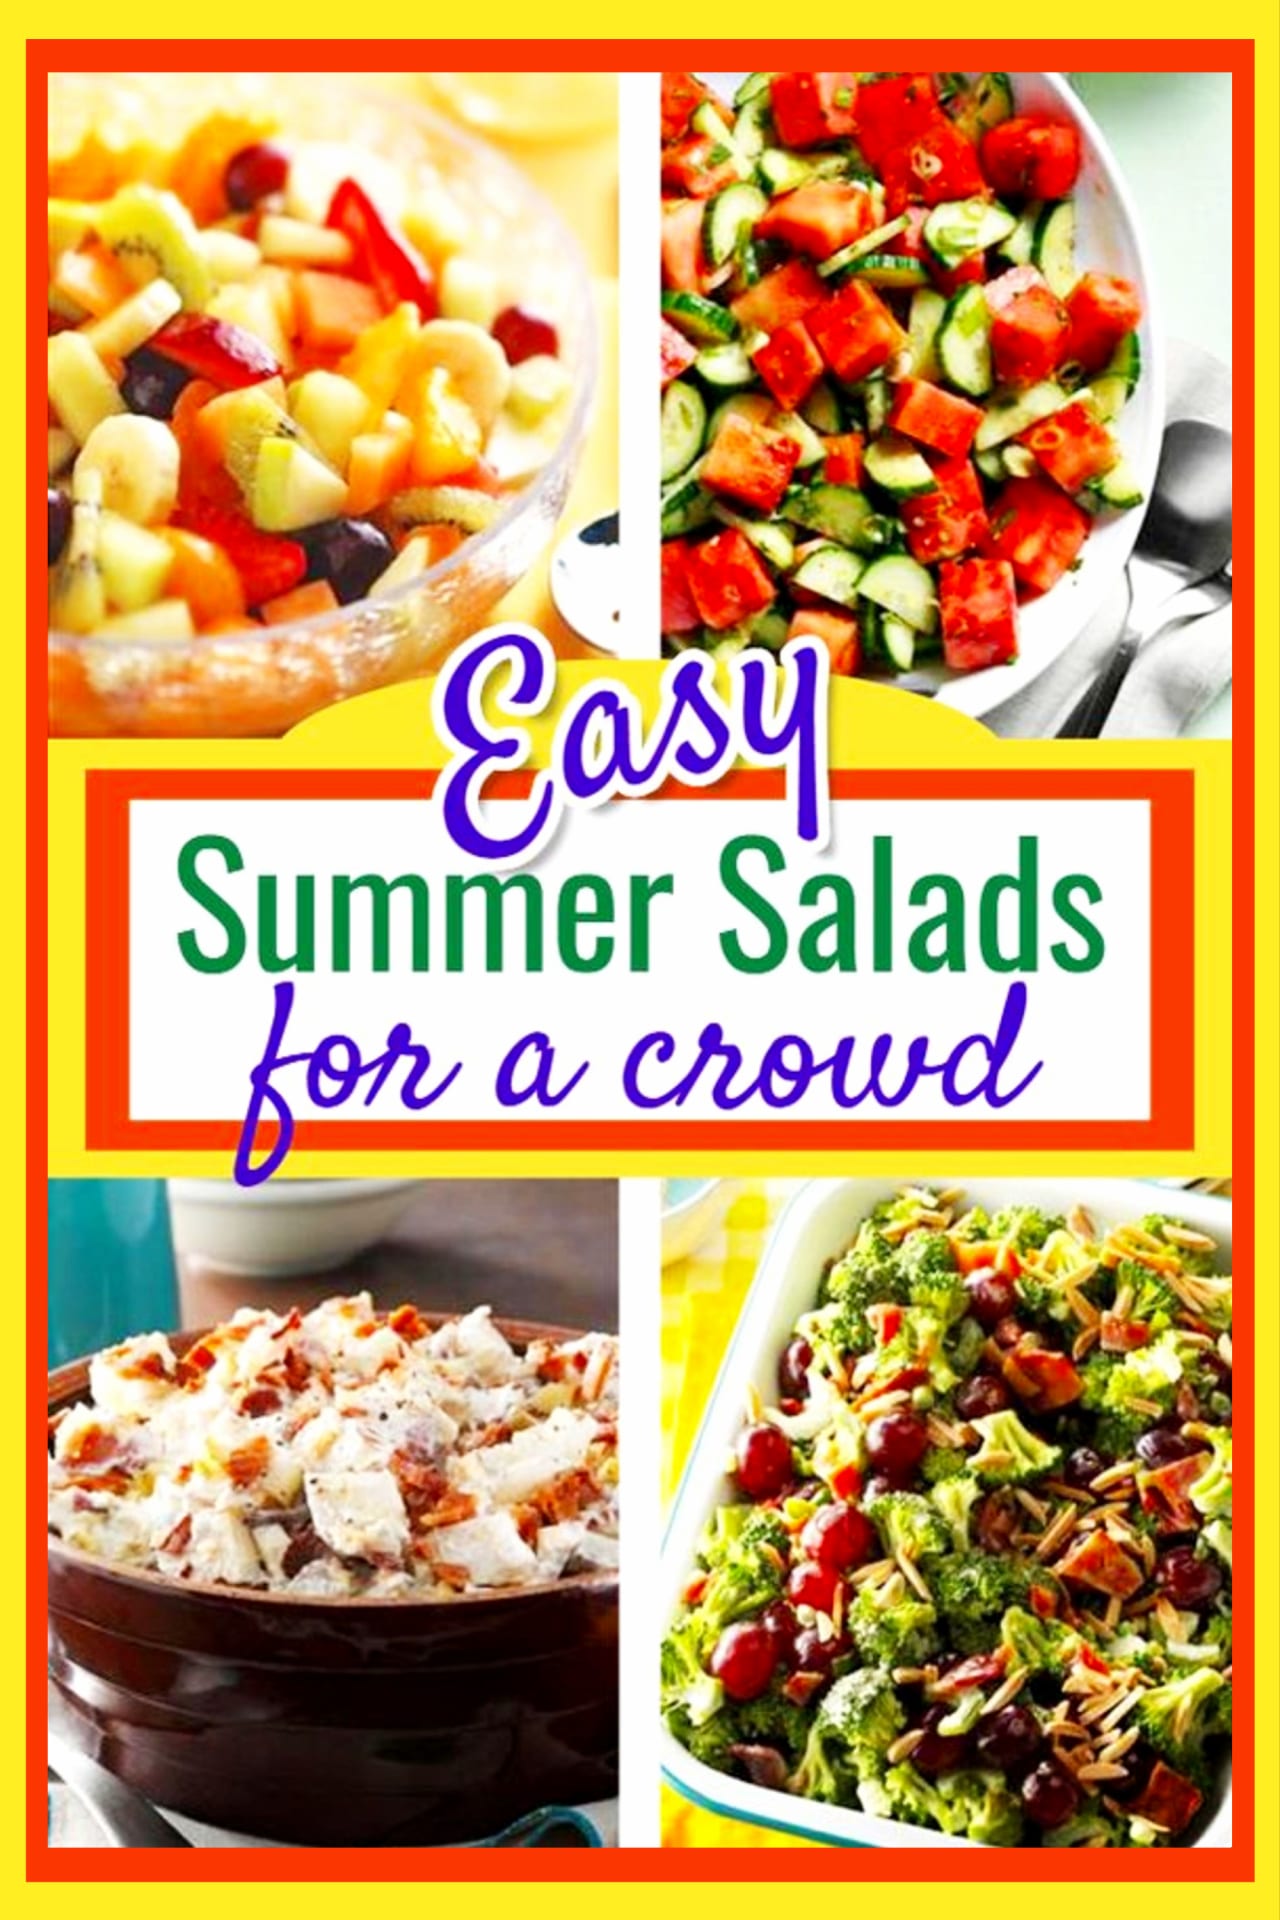 Yummy summer salads fora  crowd! Summer salads for parties easy healthy summer salads for a crowd - easy BBQ cookout summer party food idea or for your block party, picnics, potlucks, easy summer dinners for all families or family reunion - fruit bowls summer salads , easy recipes including cold pasta summer salads - summer salads with chicken and more